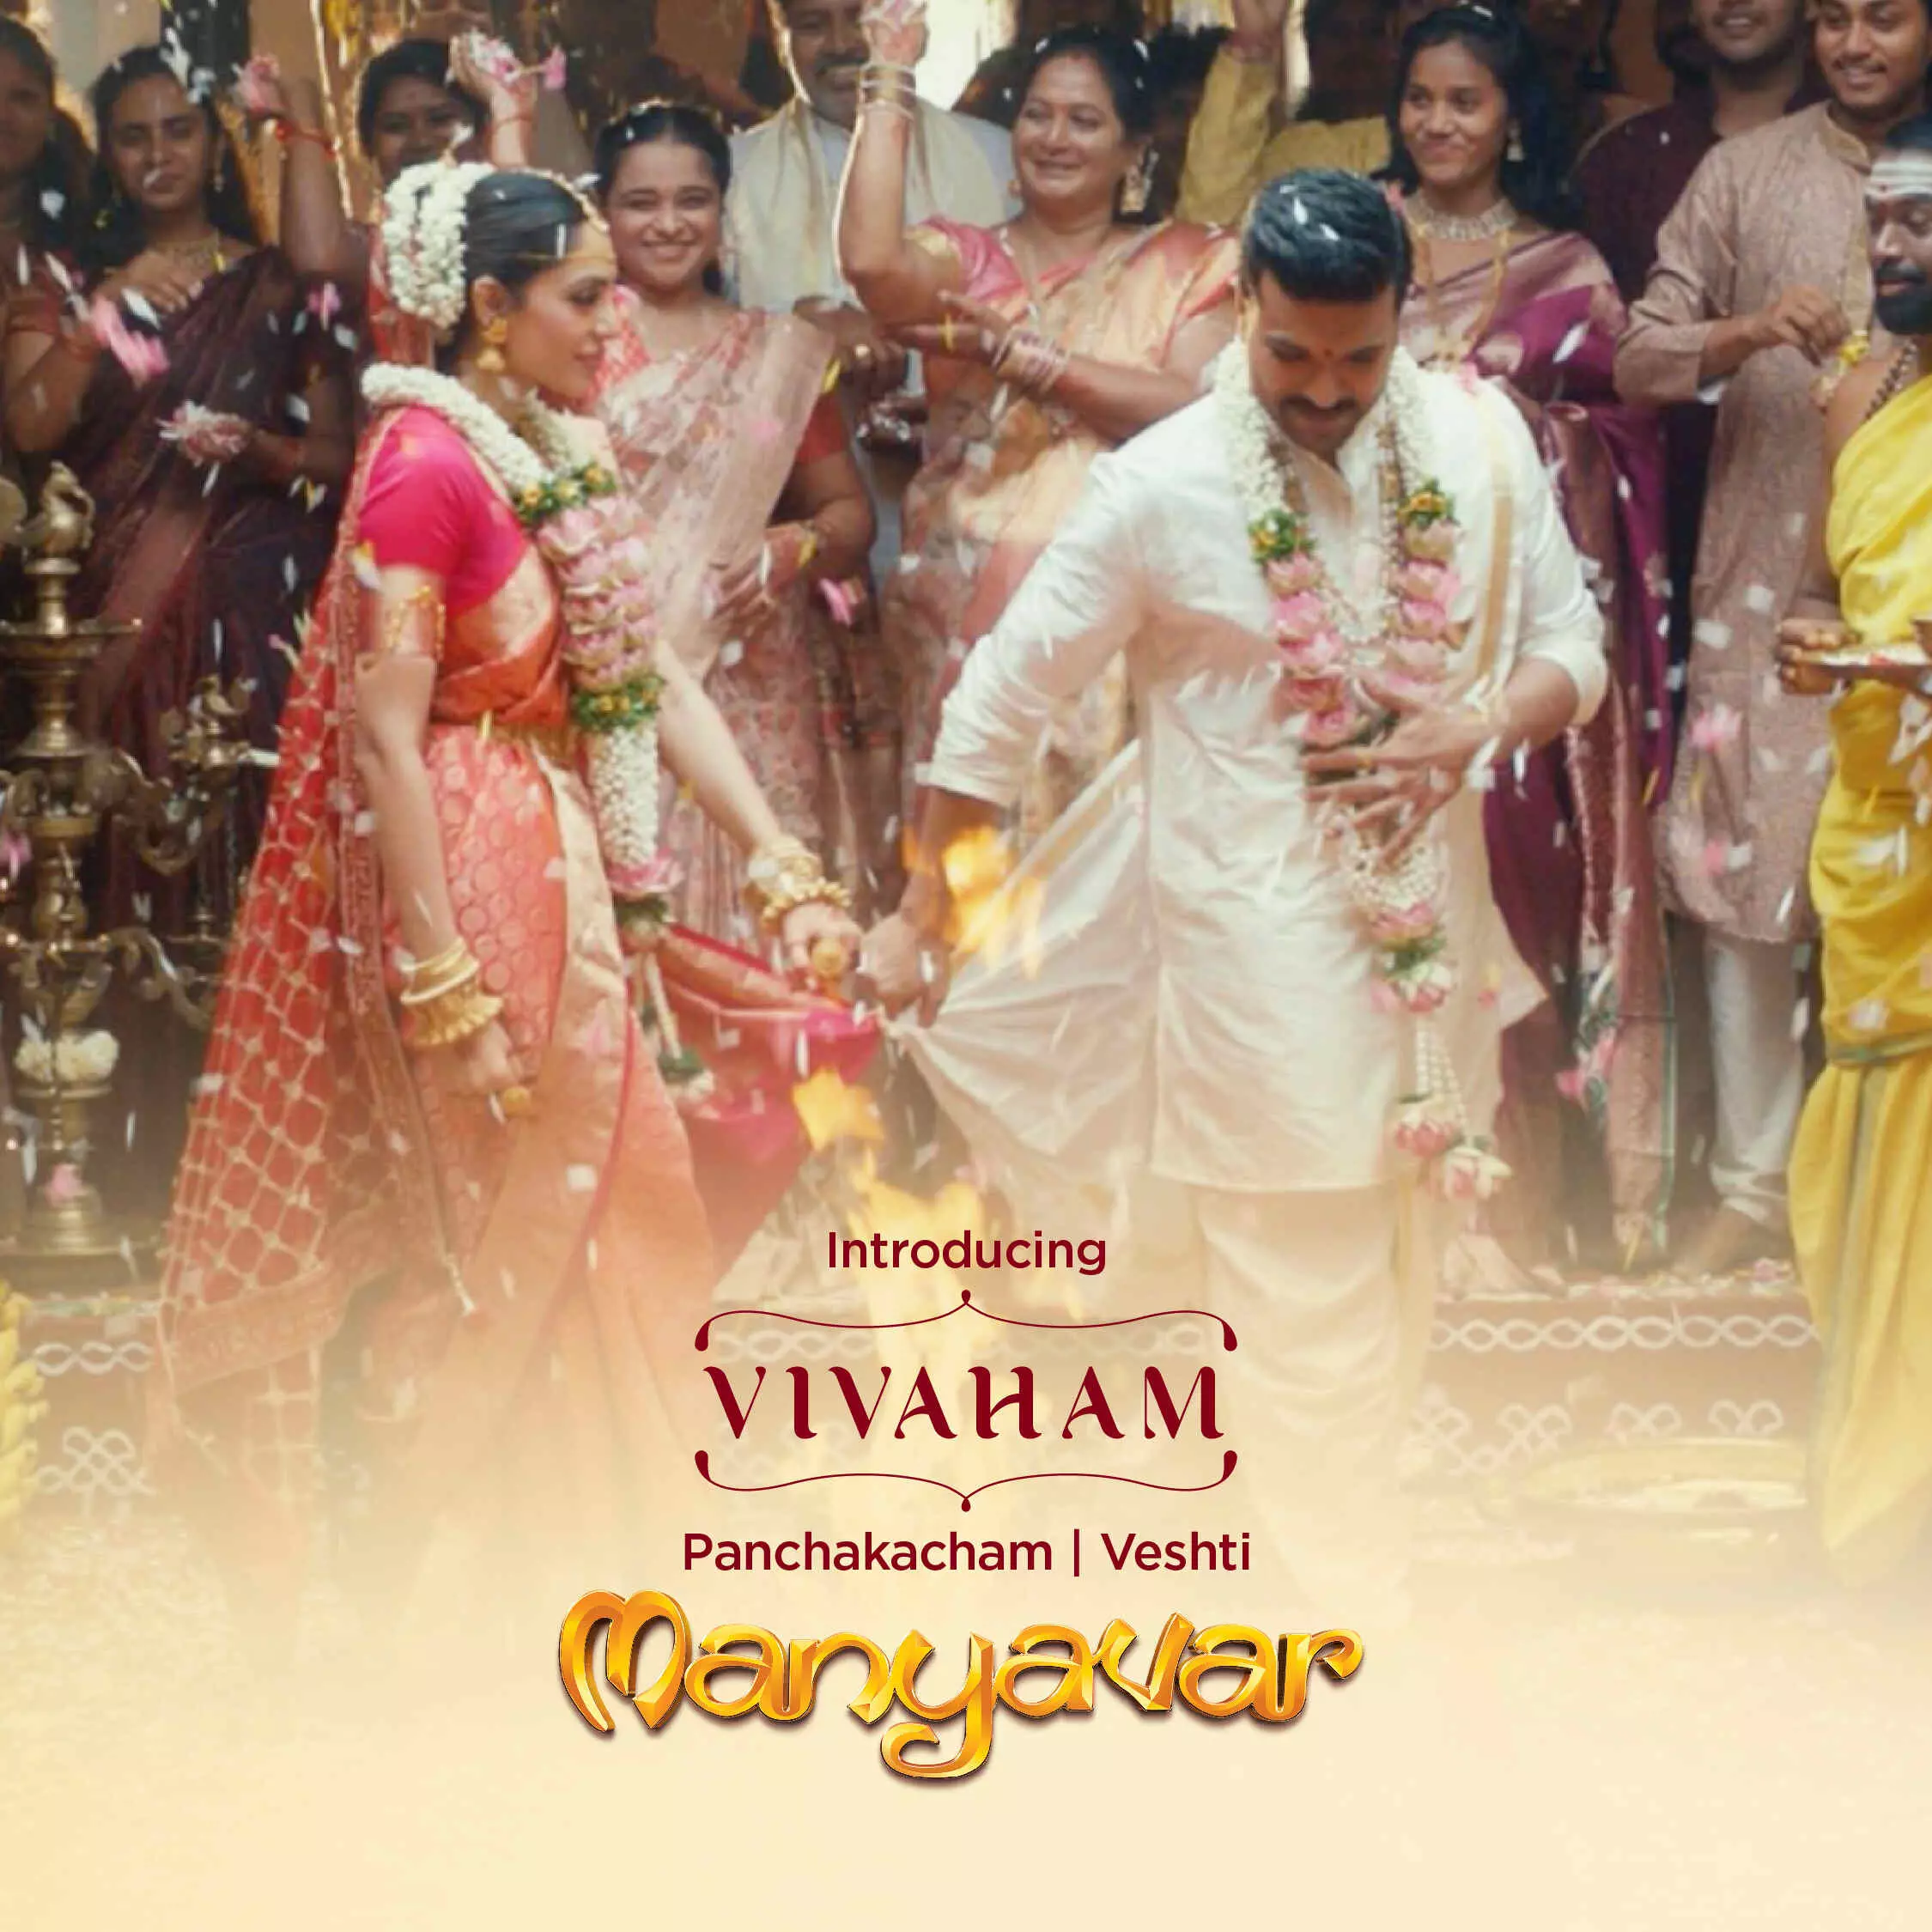 Manyavar unveils new collection and campaign film